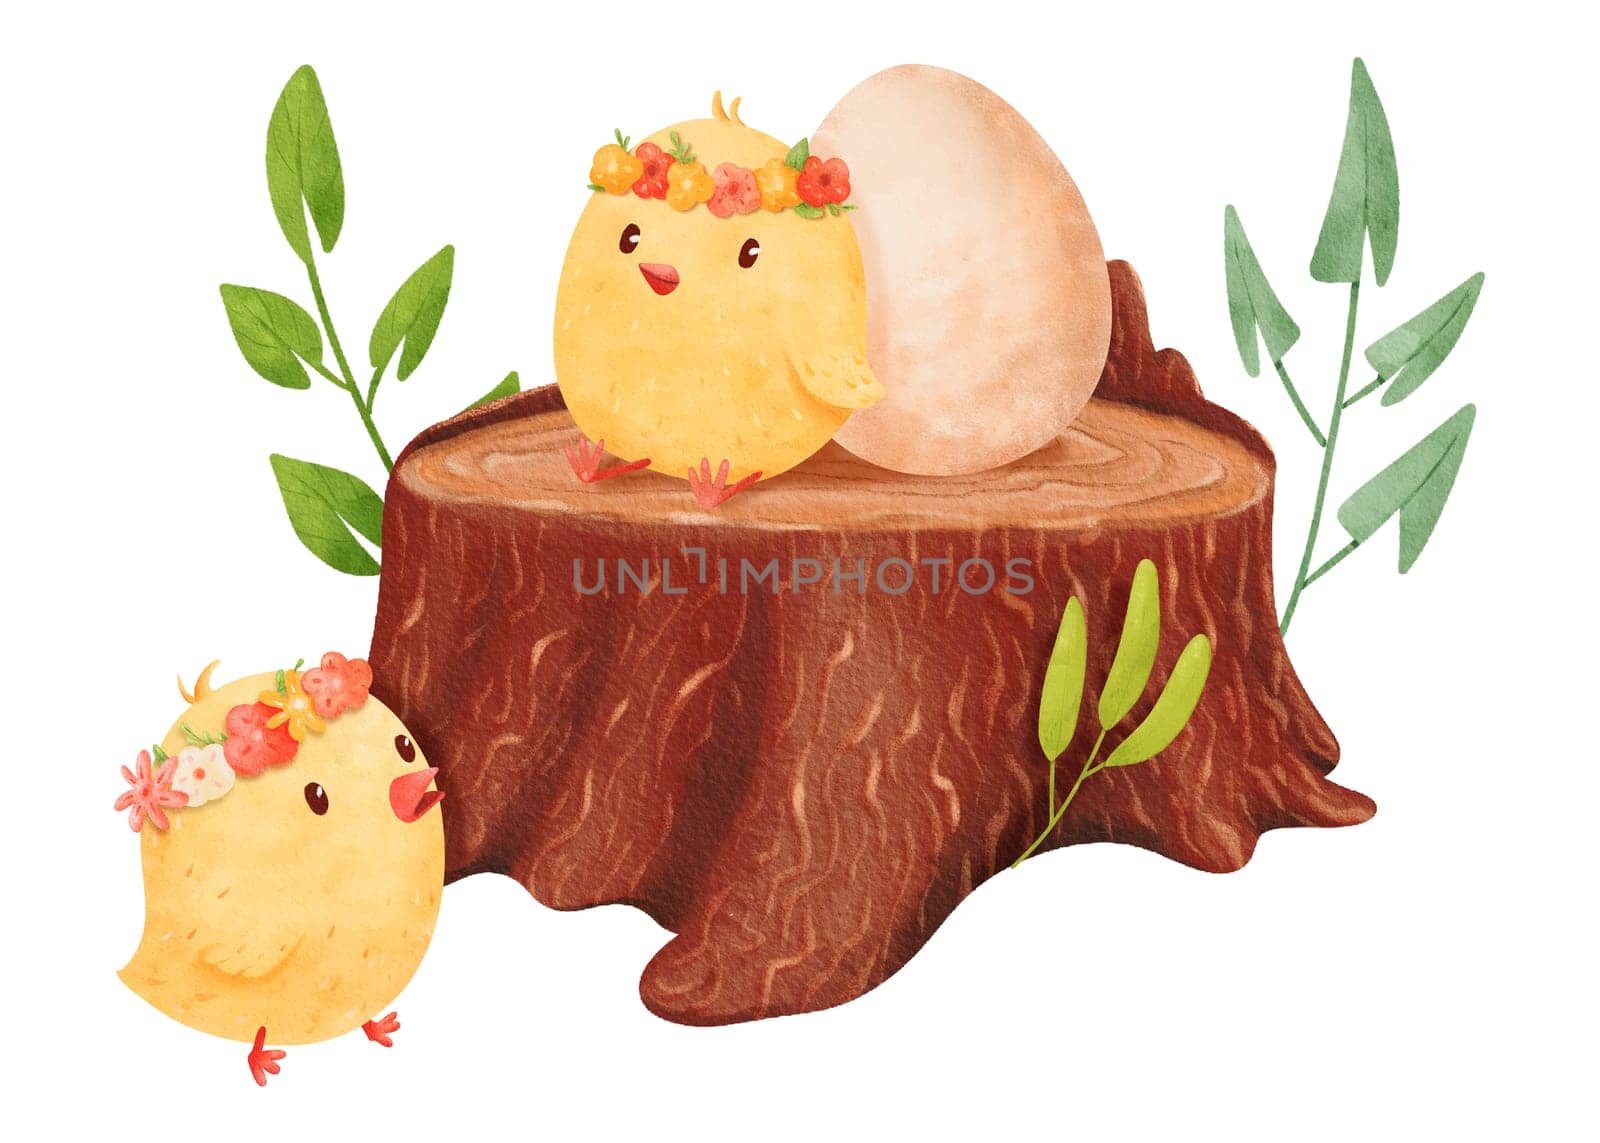 Watercolor children's composition featuring little yellow chicks playing around an old brown stump adorned with spring foliage. The stump serves as a charming nest for a chicken egg by Art_Mari_Ka